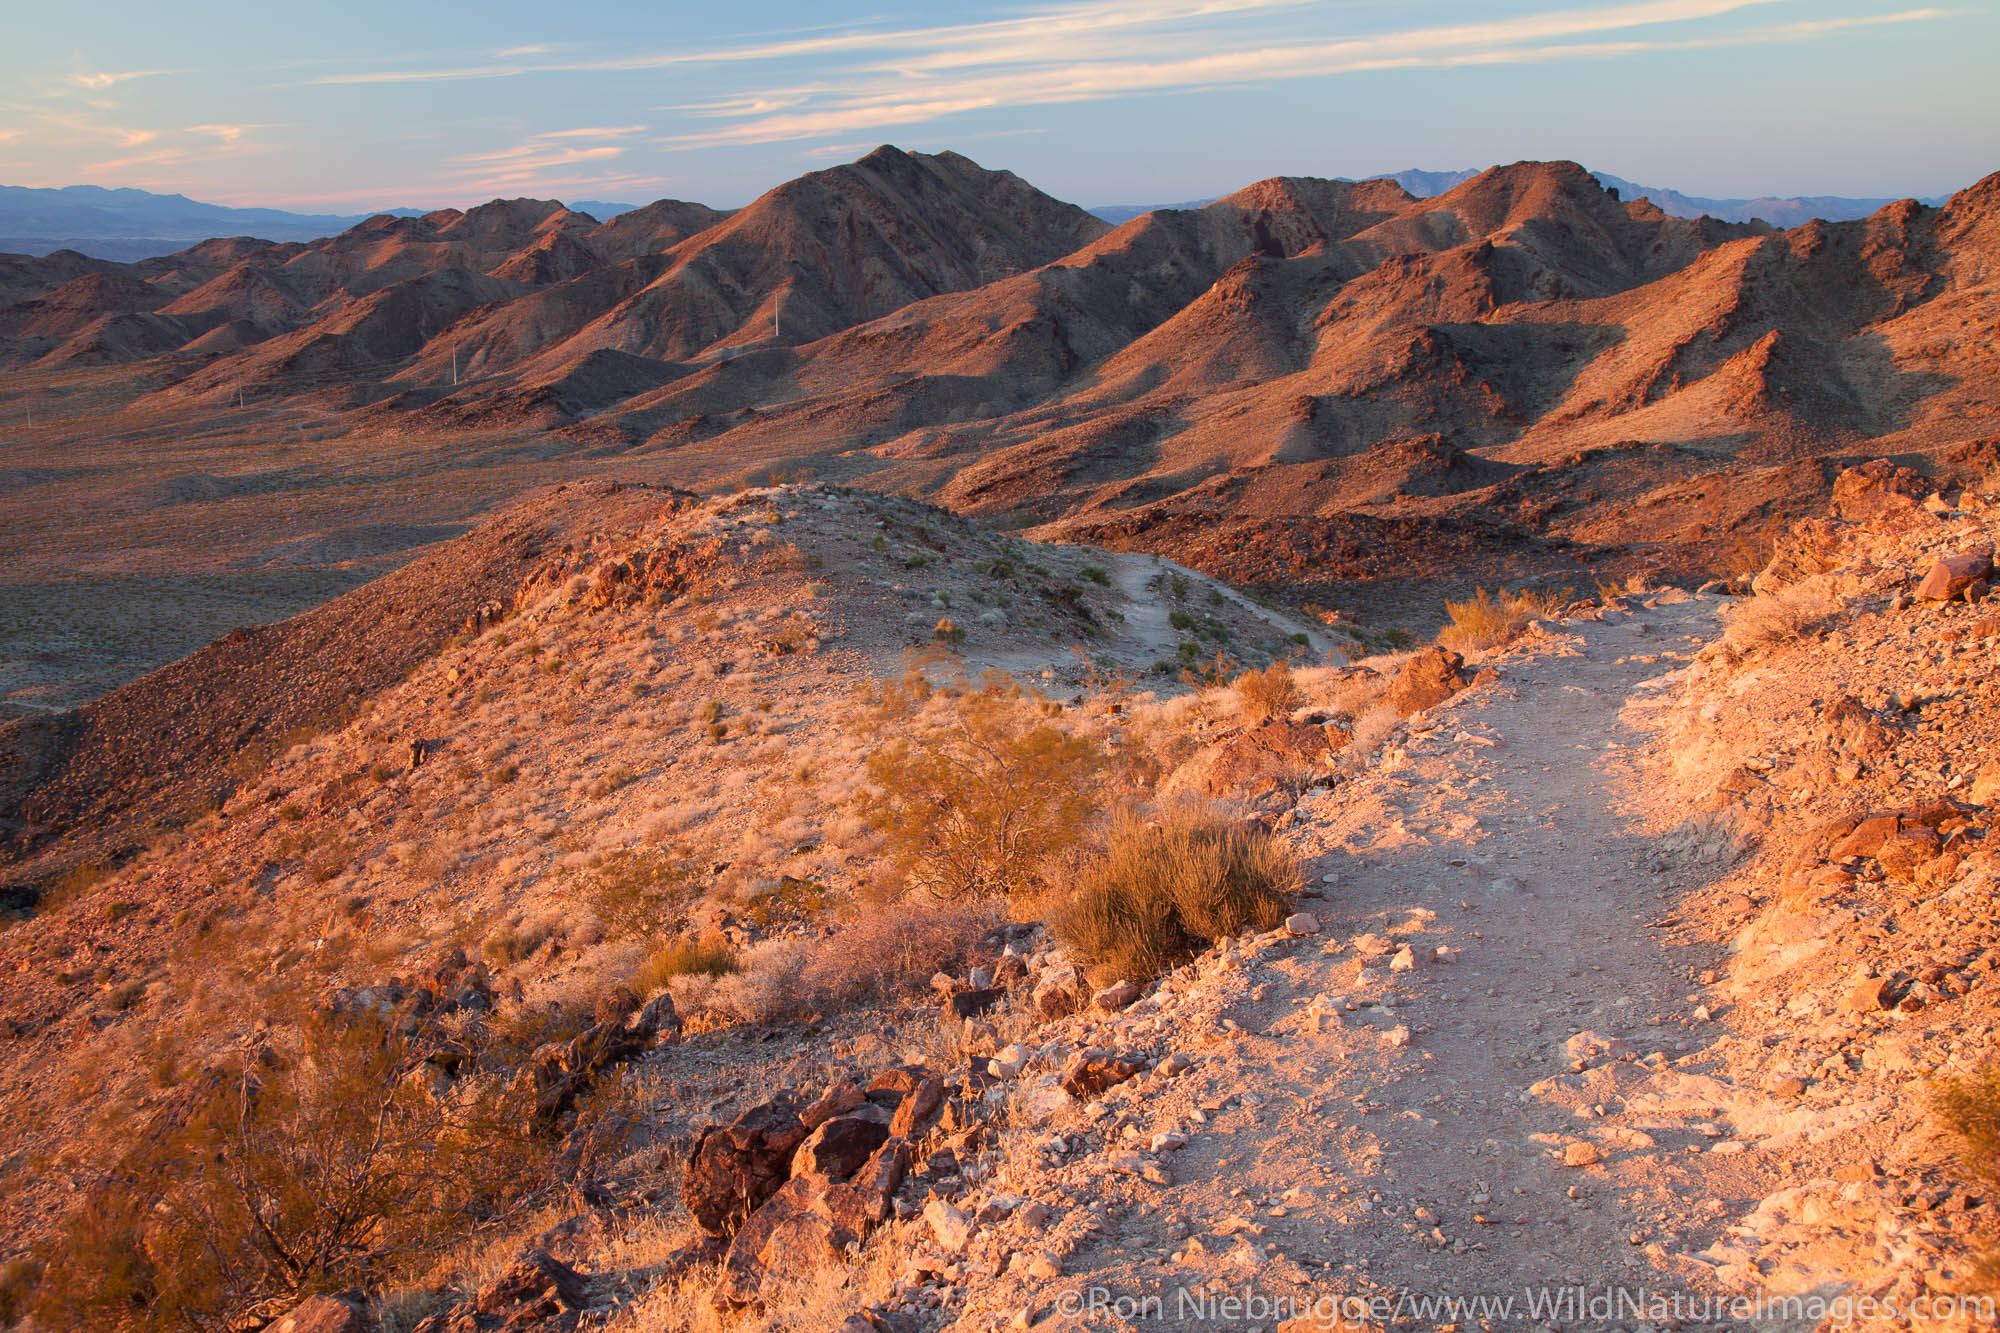 Some of the single track trails that make up the Bootleg Canyon mountain biking area, Boulder City, Nevada.